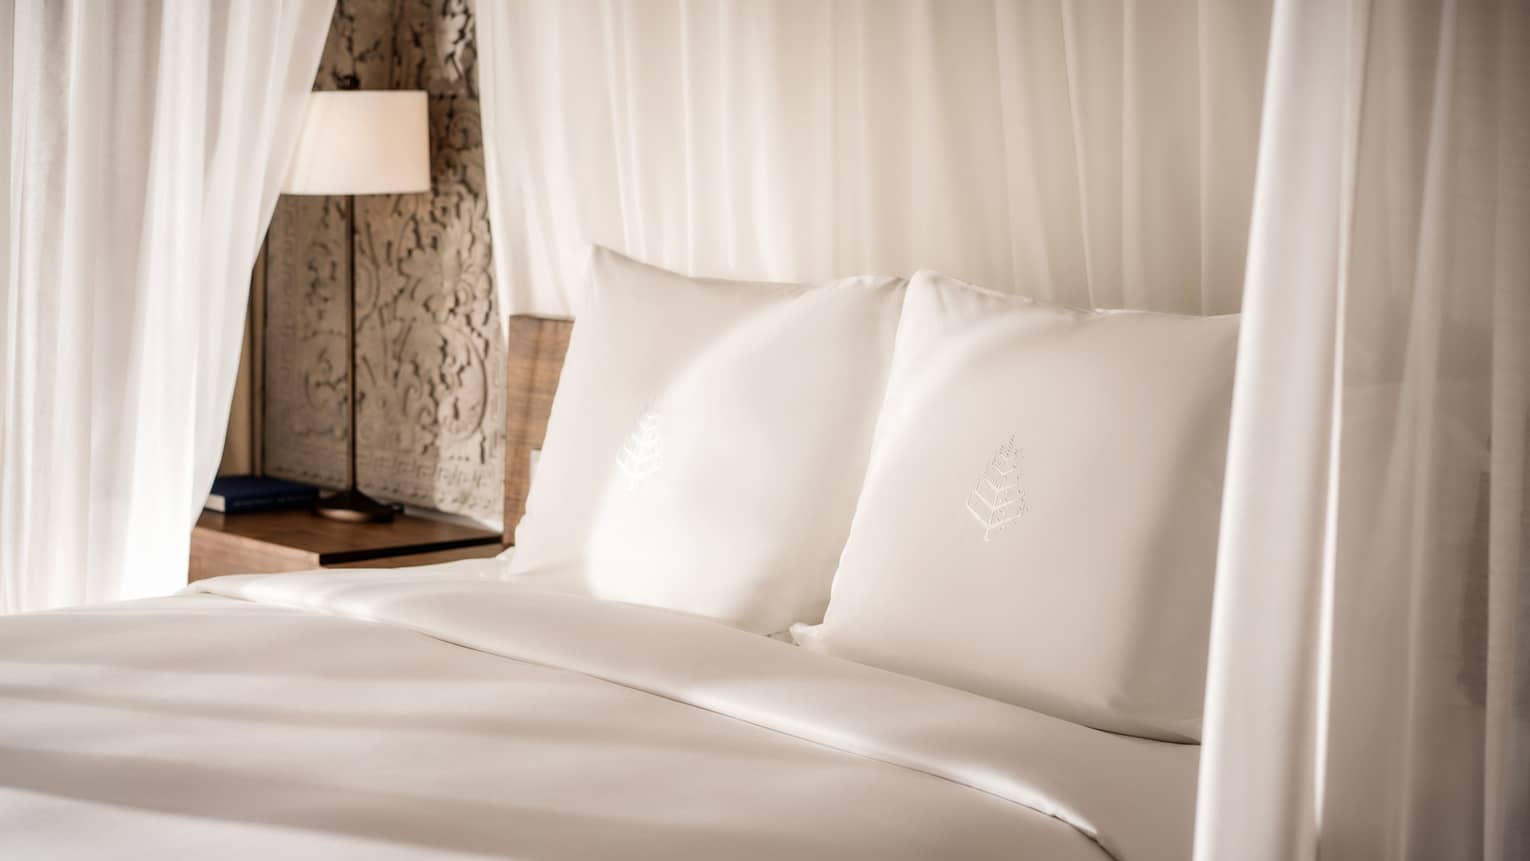 Close-up of bed headboard, white pillows with Four Seasons logo embroidered, crisp white linens, white curtains